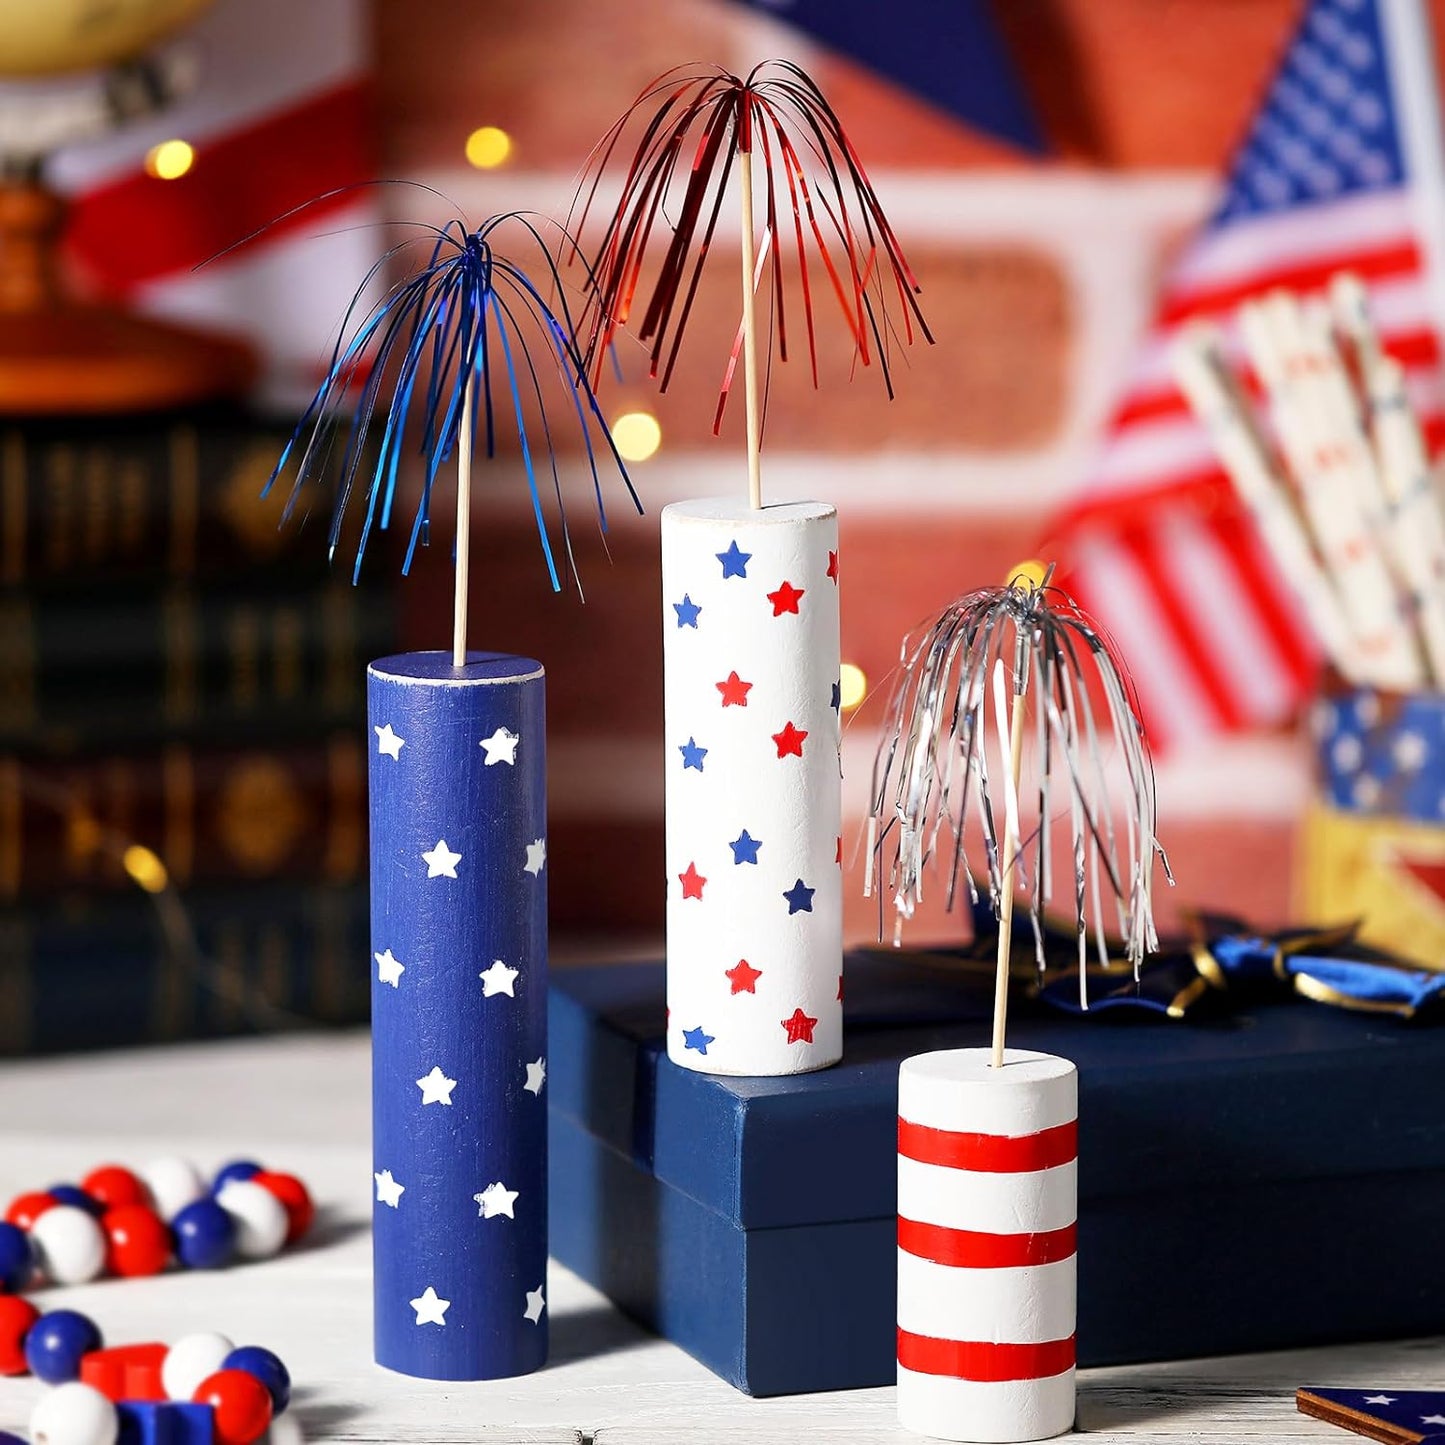 3 Pcs 4Th of July Wooden Firework Patriotic Tiered Tray Decor Independence Day Centerpiece Memorial Day Table Decor Patriotic Wooden Centerpiece for Home Decorations(Stripe and Star)